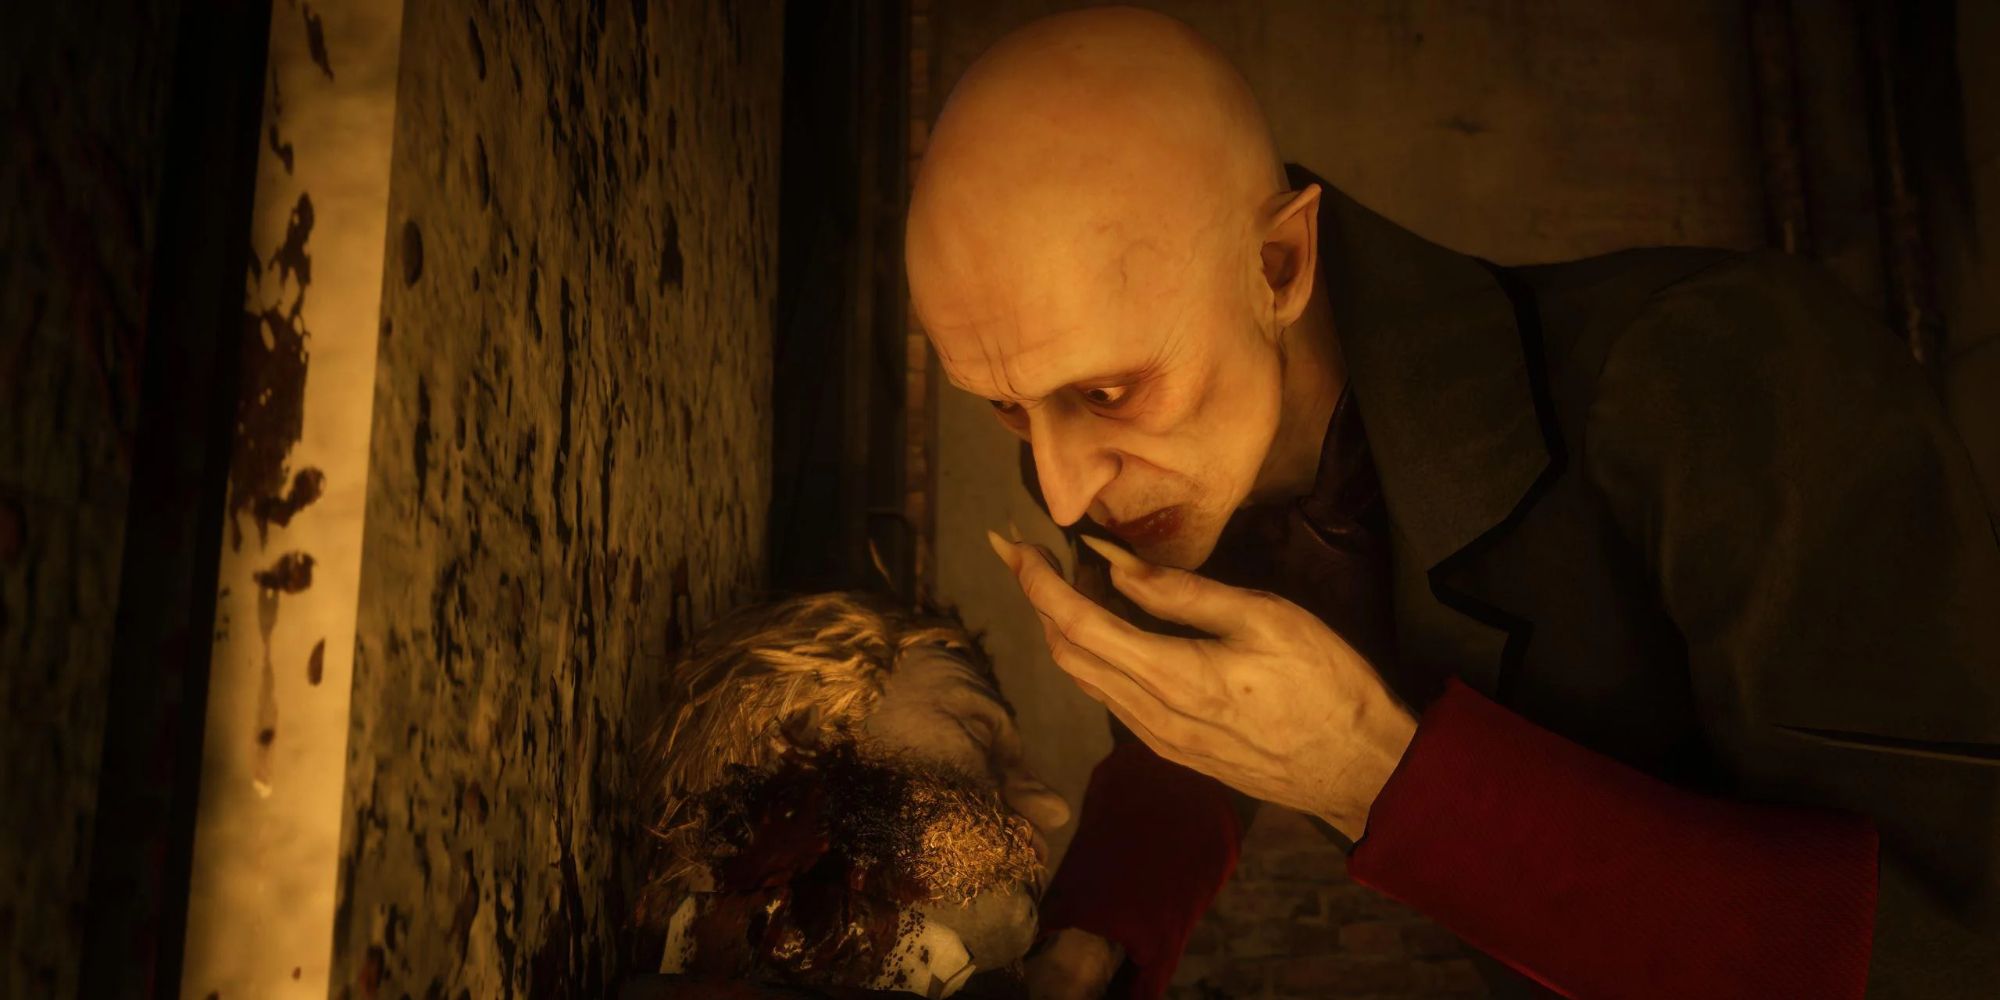 Red Dead Redemption 2's vampire pays homage to the classic film Nosferatu with its appearance